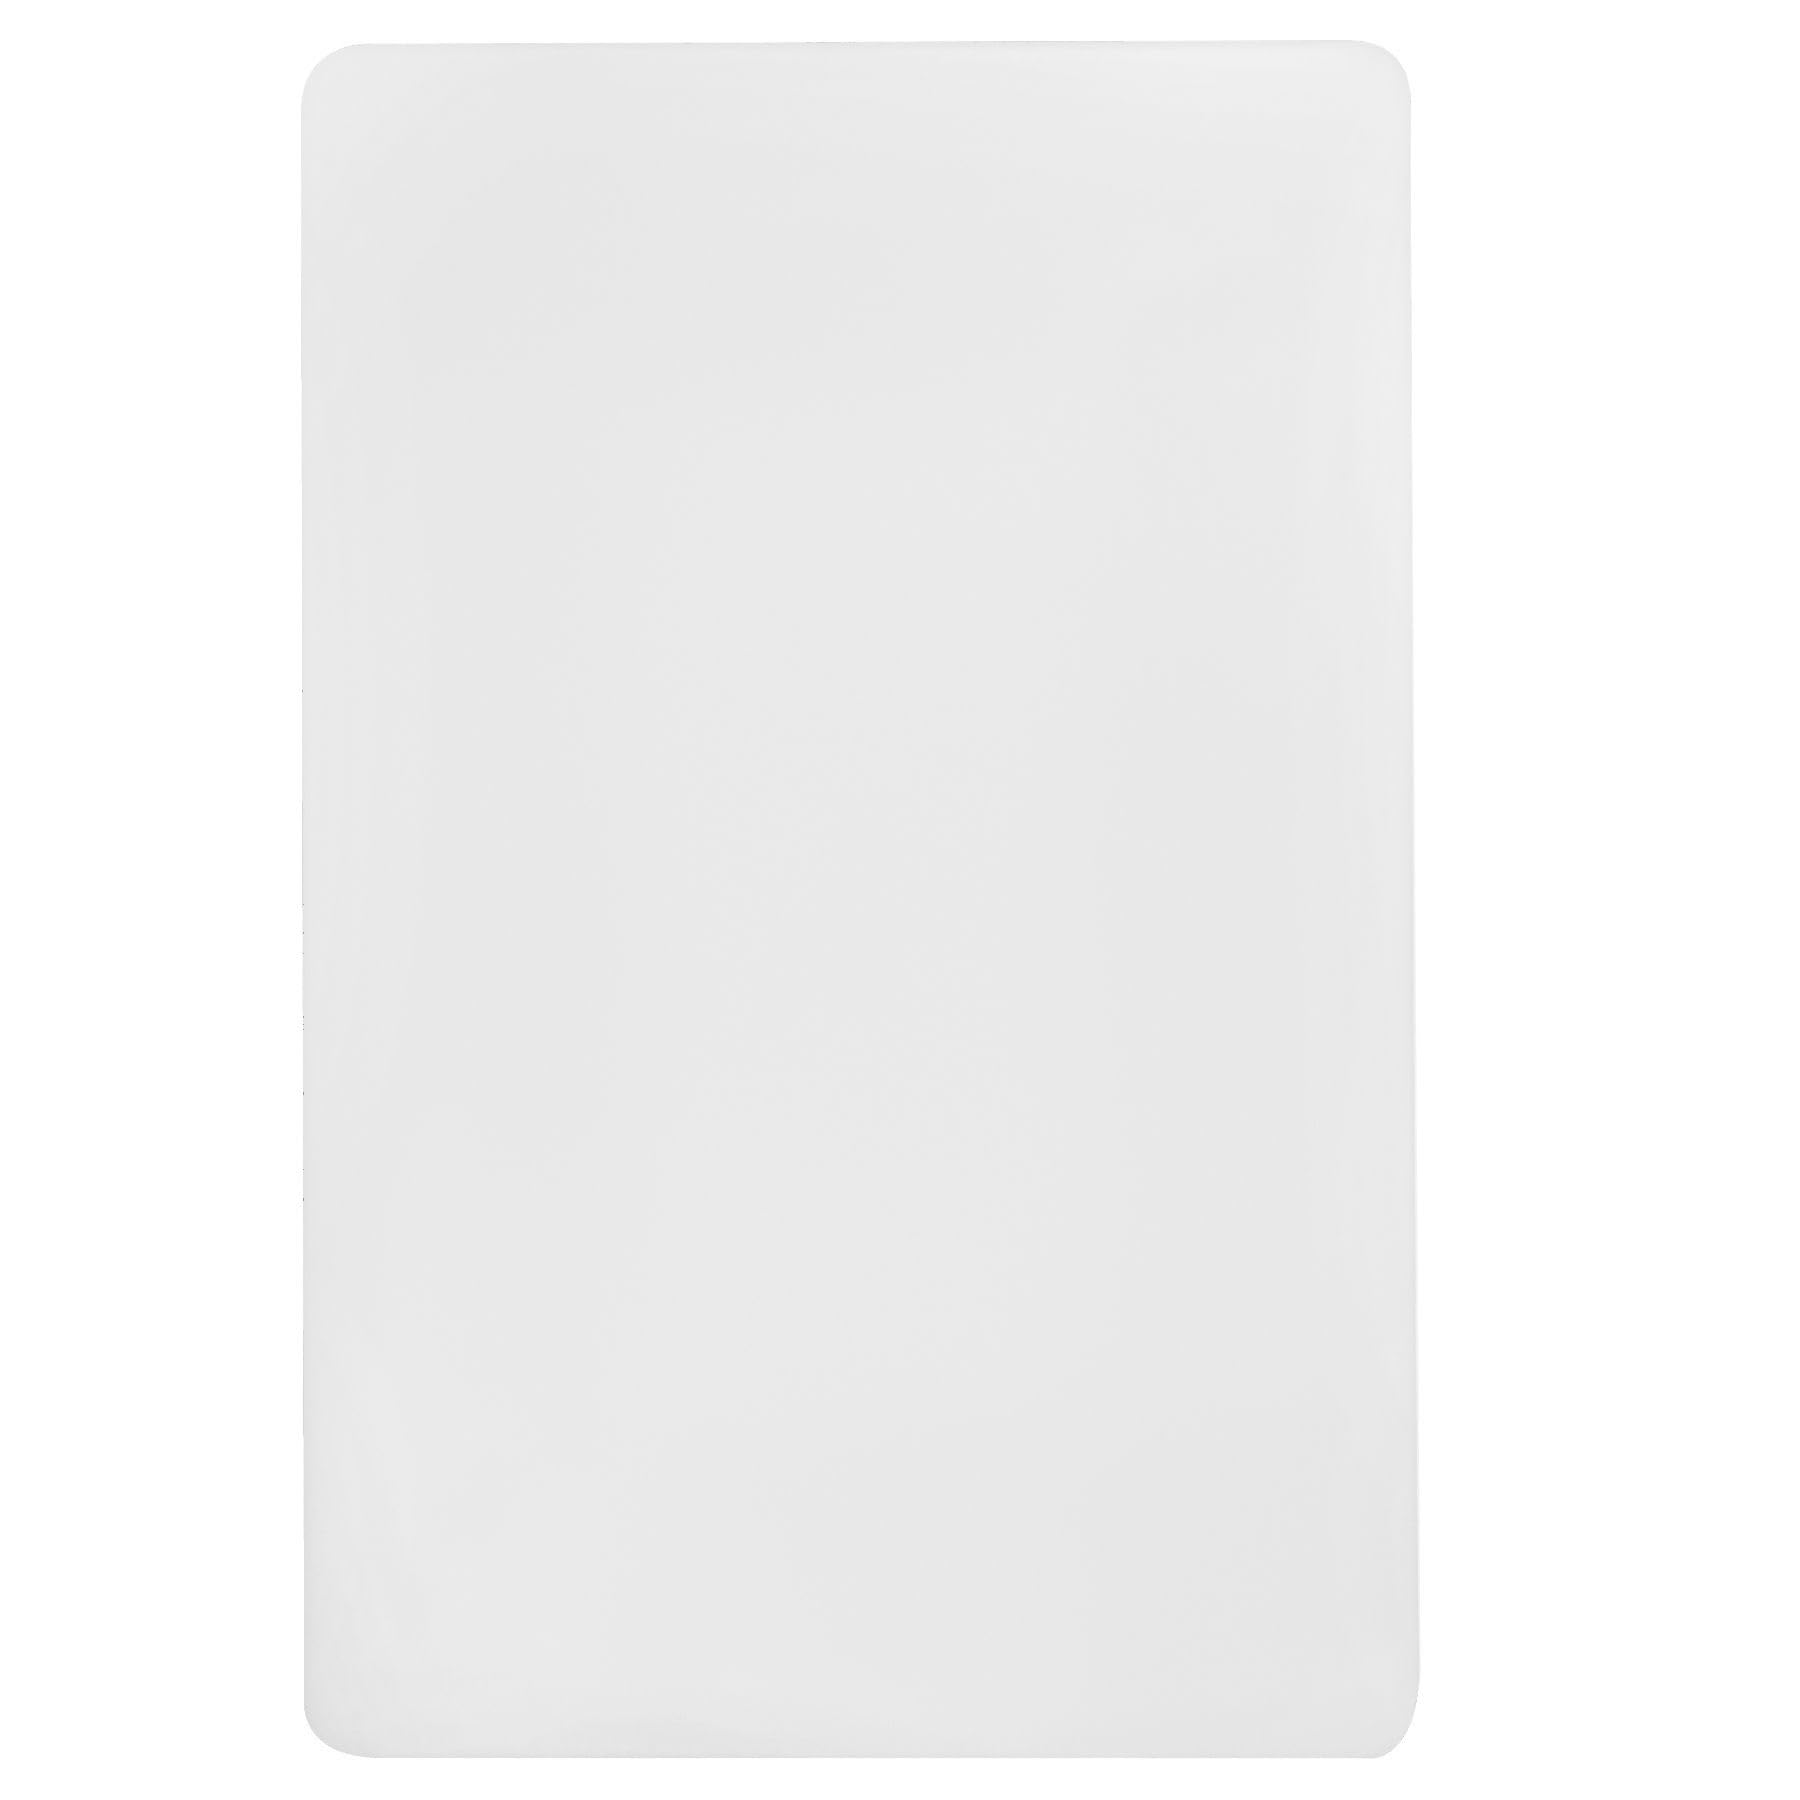 TrueCraftware 24" x 18" x 1/2" White Plastic Utility Cutting Board- Non-Skid Thick Chopping Board Cutting Boards for Meat & Vegetables Dishwasher Safe for Home Kitchen and Restaurants